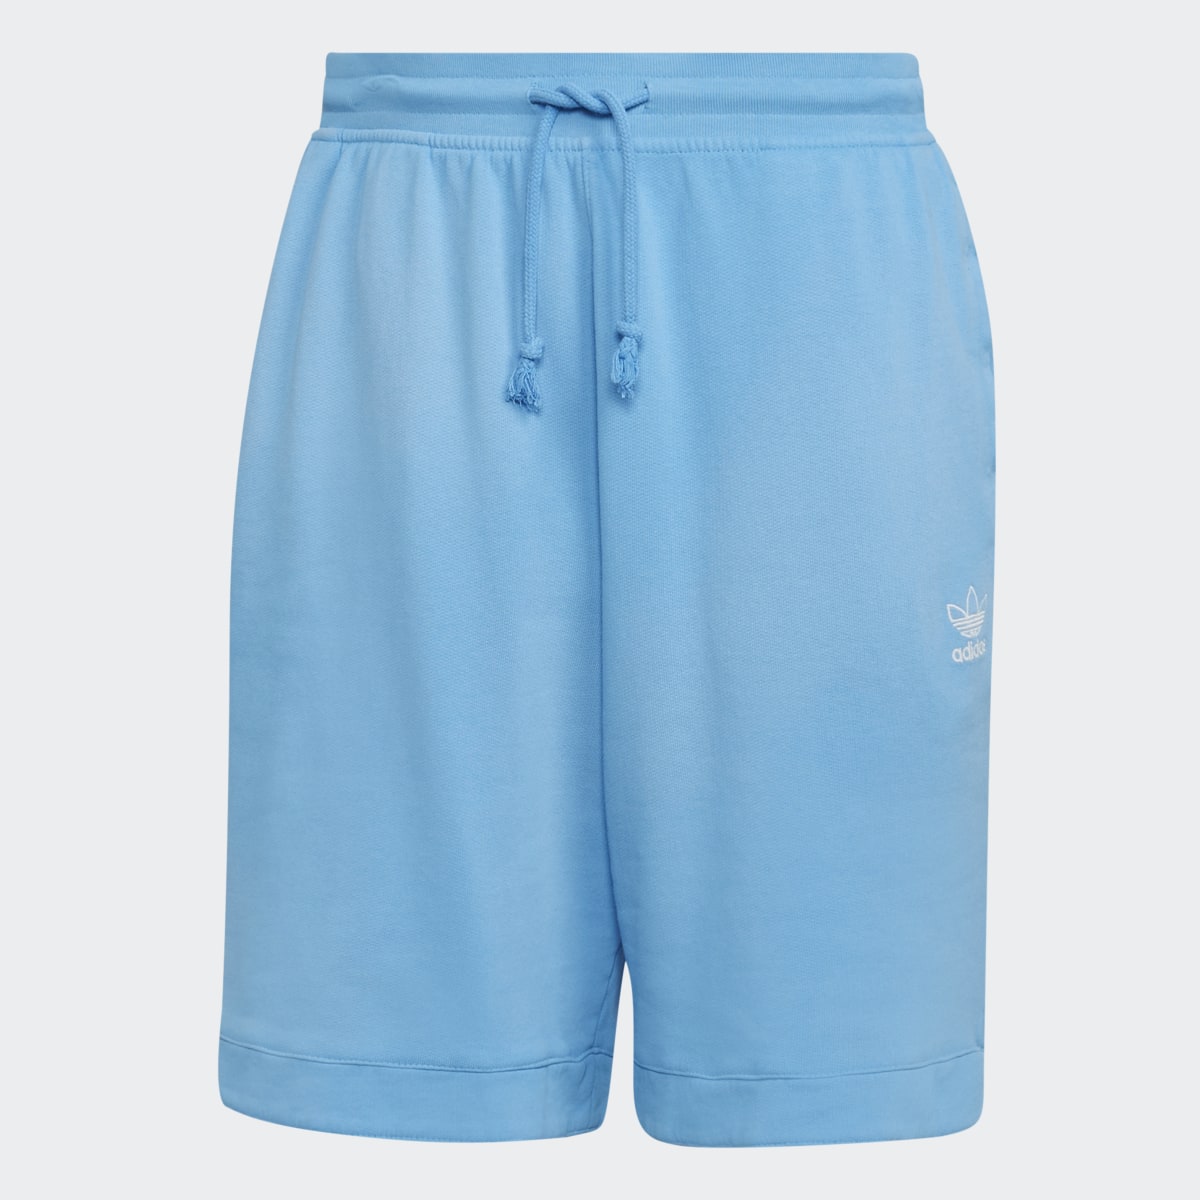 Adidas Essentials+ Made with Nature Shorts. 4